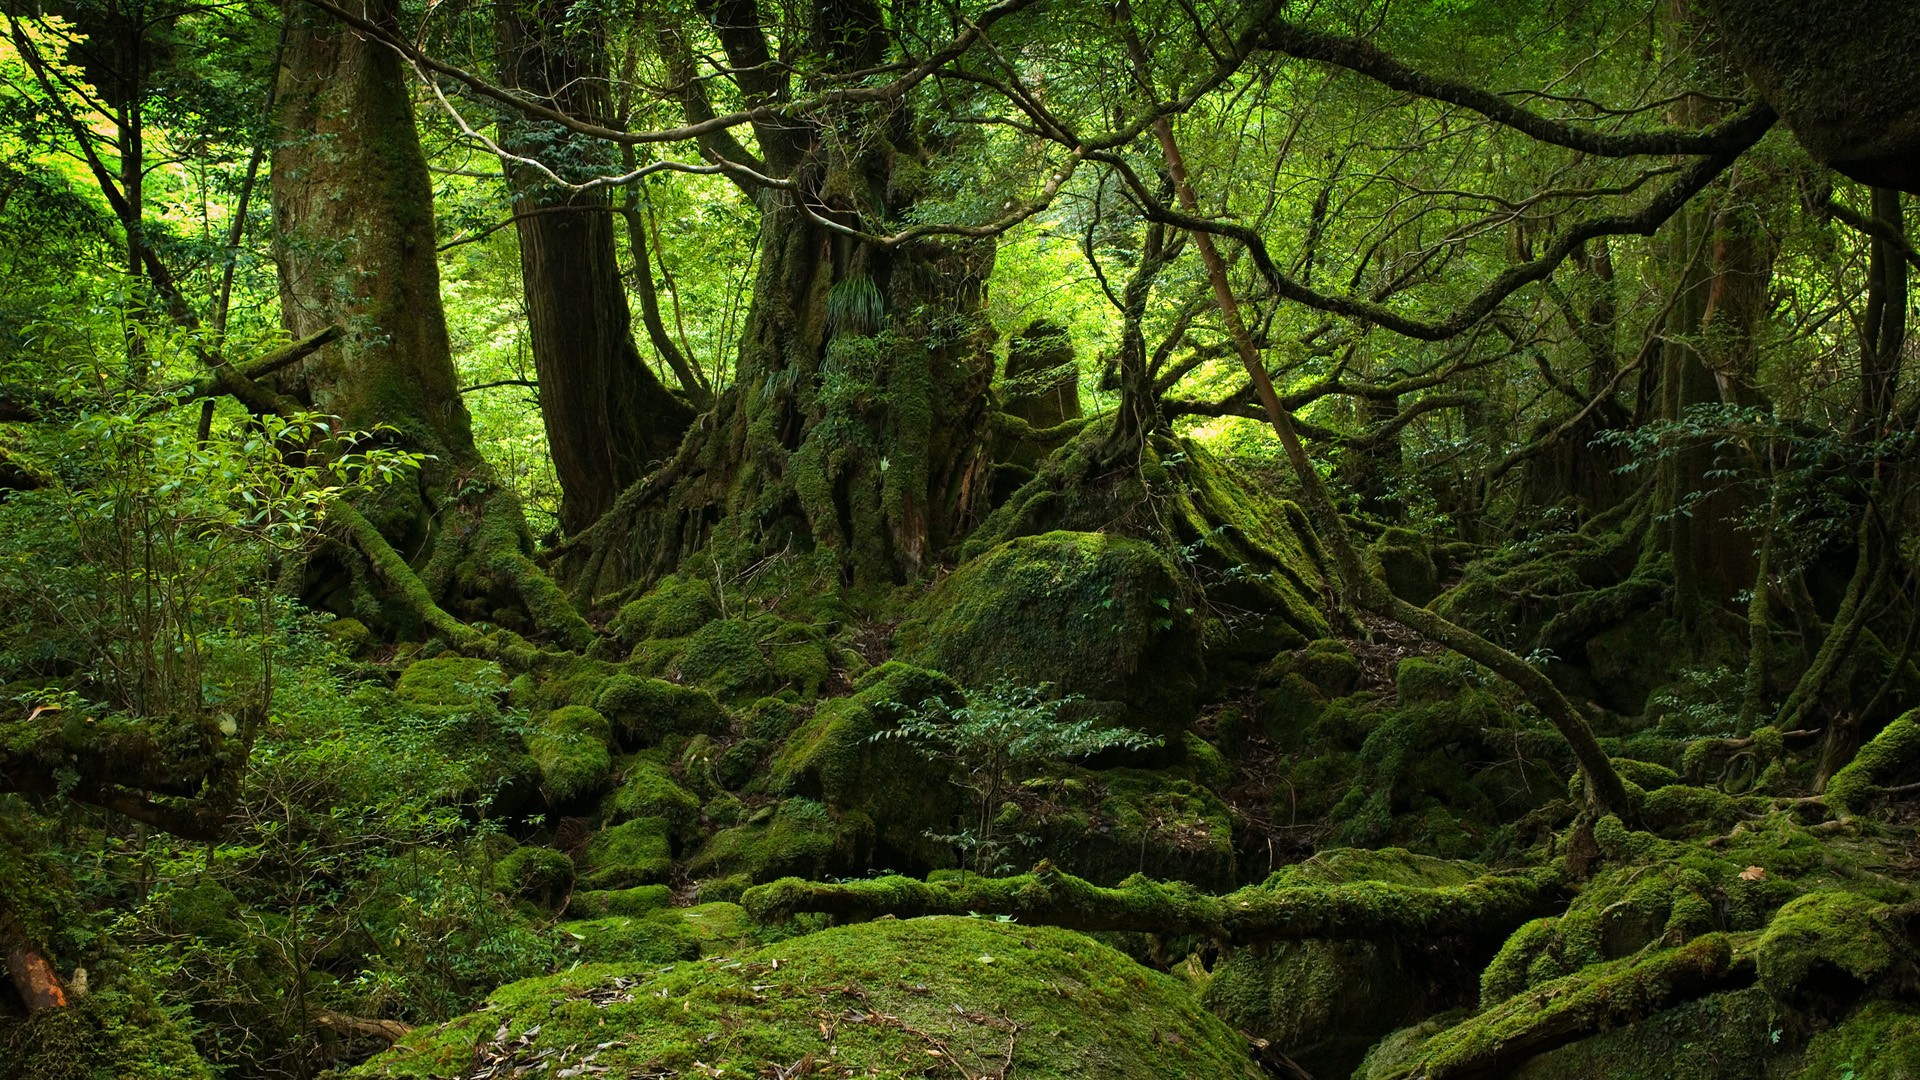 General 1920x1080 trees forest nature landscape moss